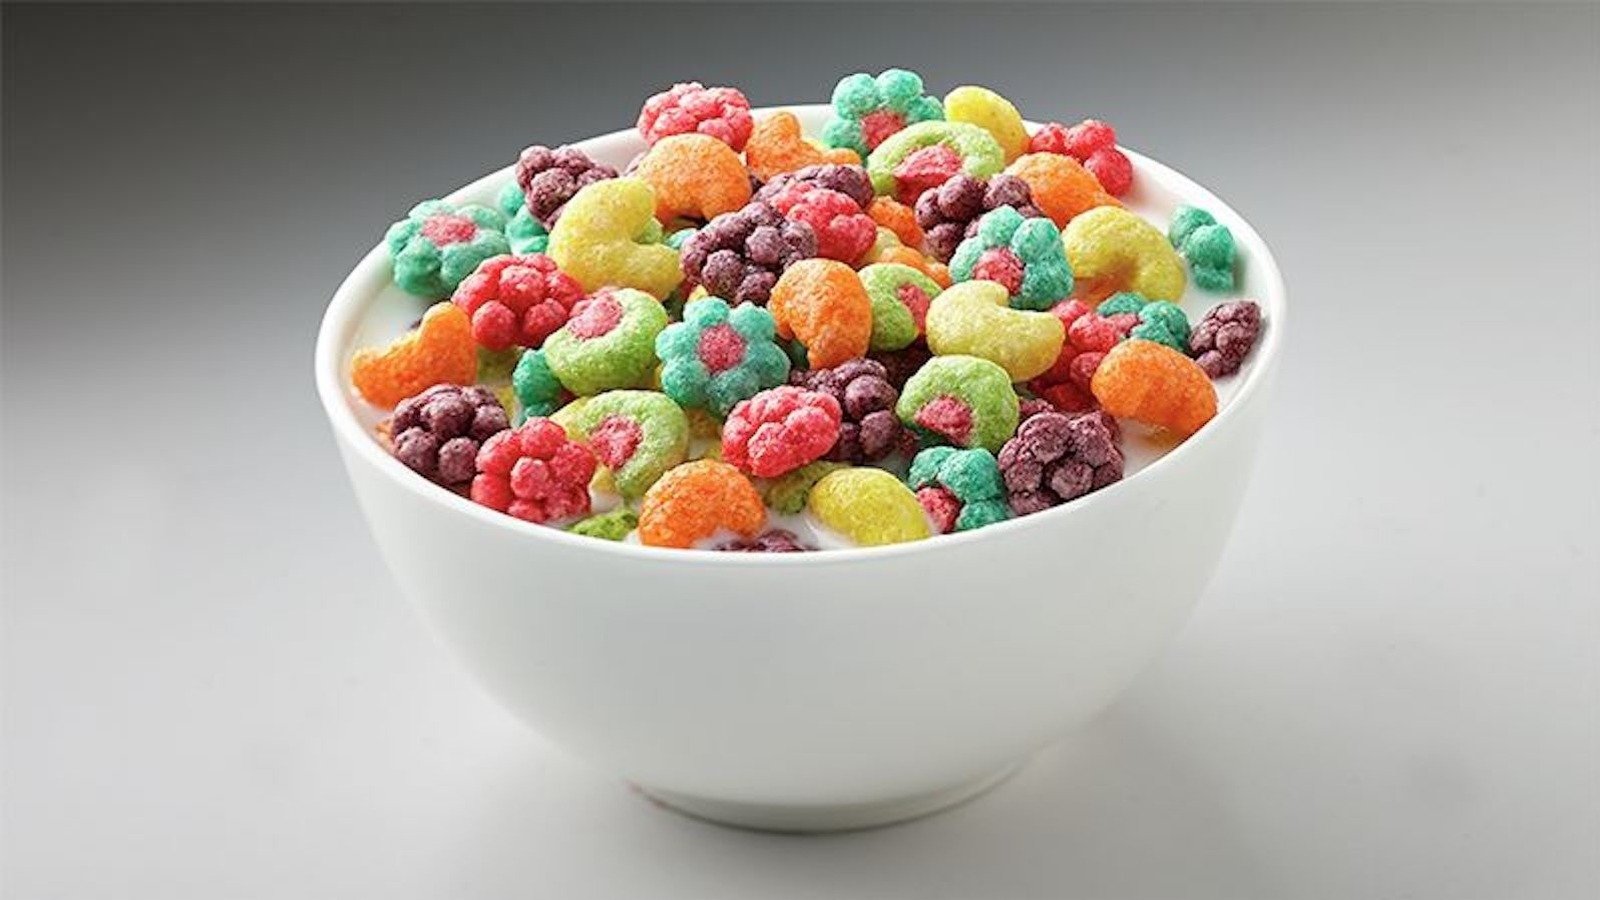 Why You Should Think Twice About Eating Trix Cereal